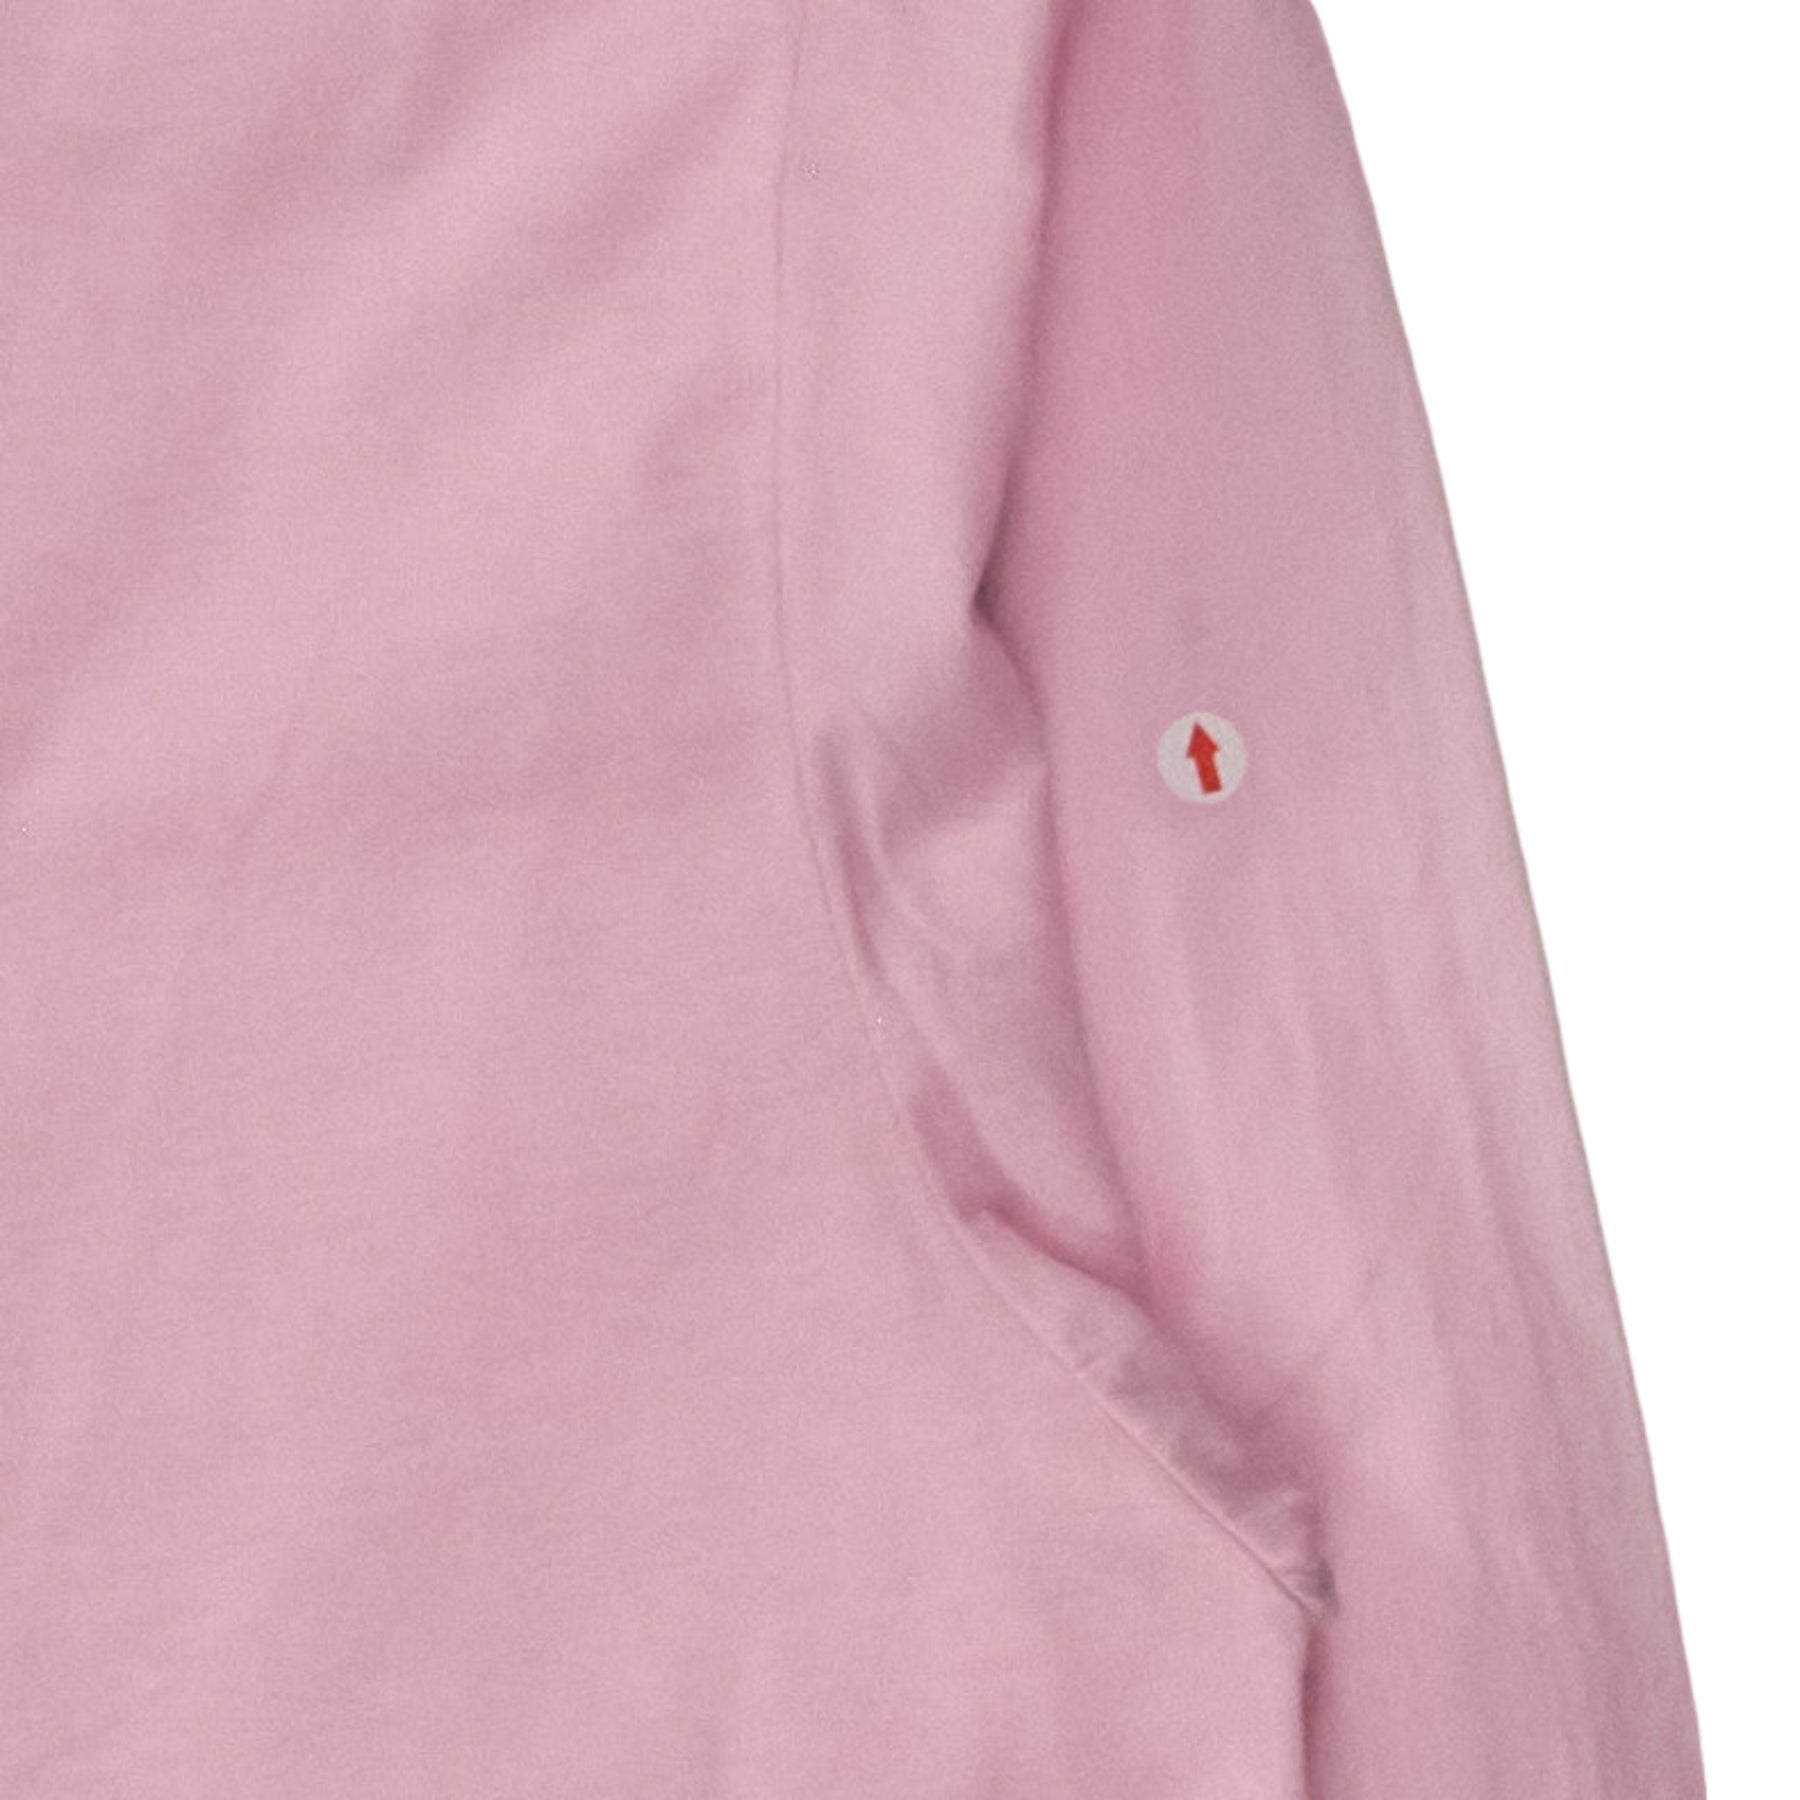 NRBY Pink Jersey/Cotton Shirt